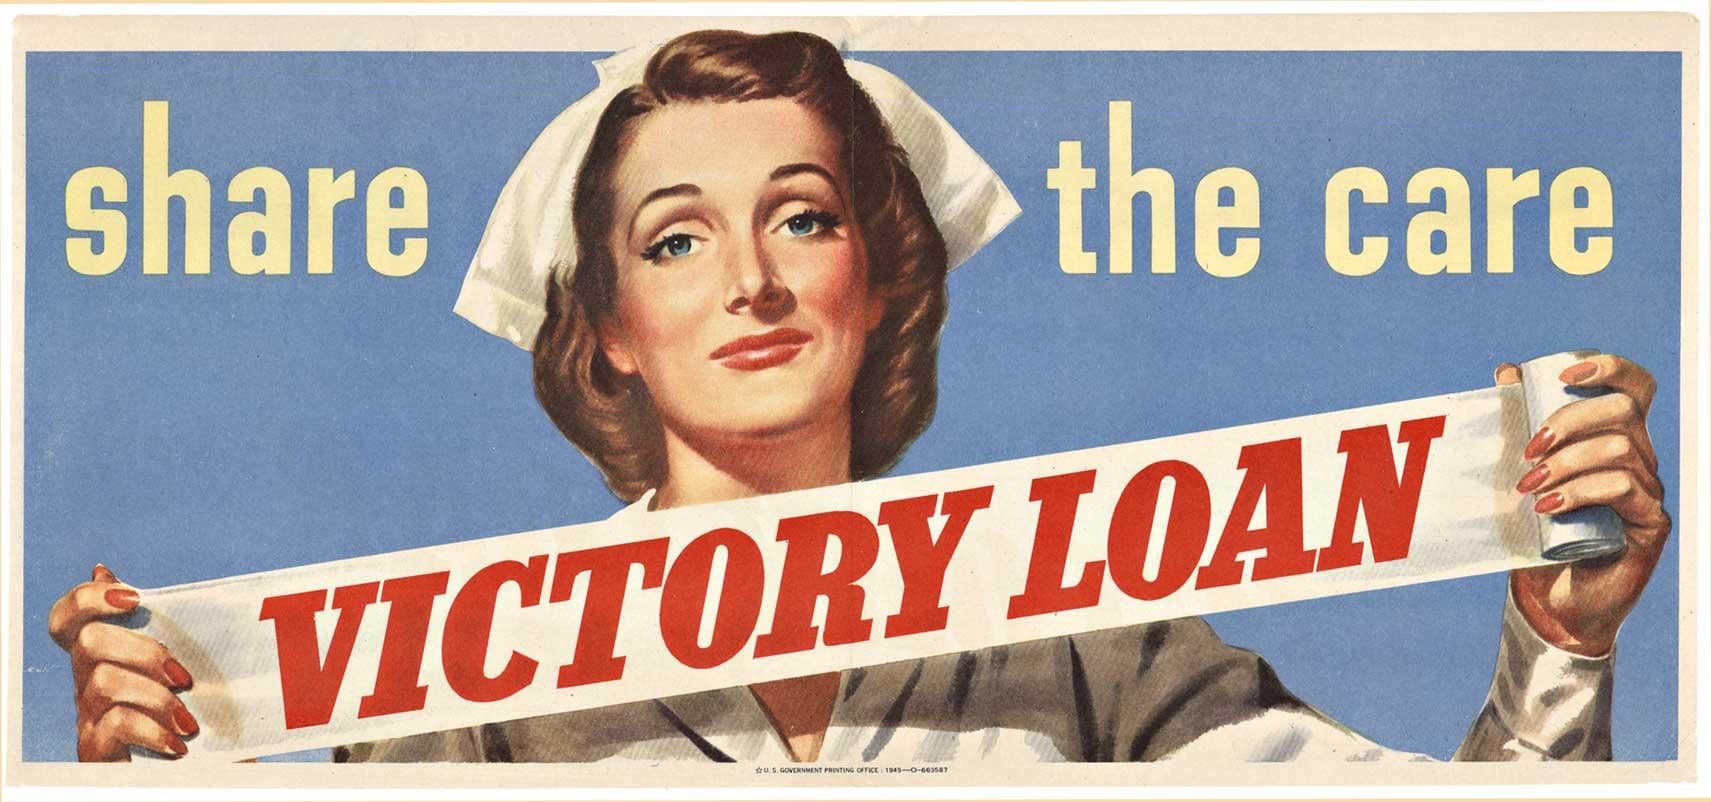 Original 1945 "Share the Care, Victory Loan" vintage poster